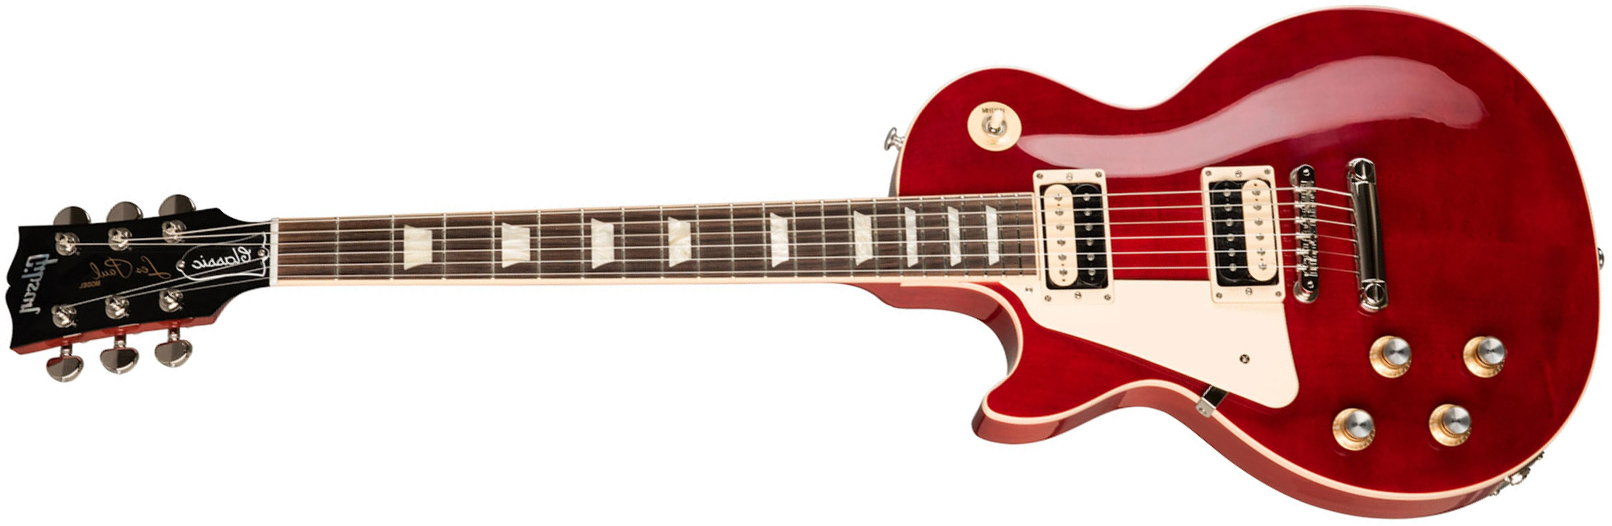 Gibson Les Paul Classic Lh Modern Gaucher 2h Ht Rw - Trans Cherry - Left-handed electric guitar - Main picture